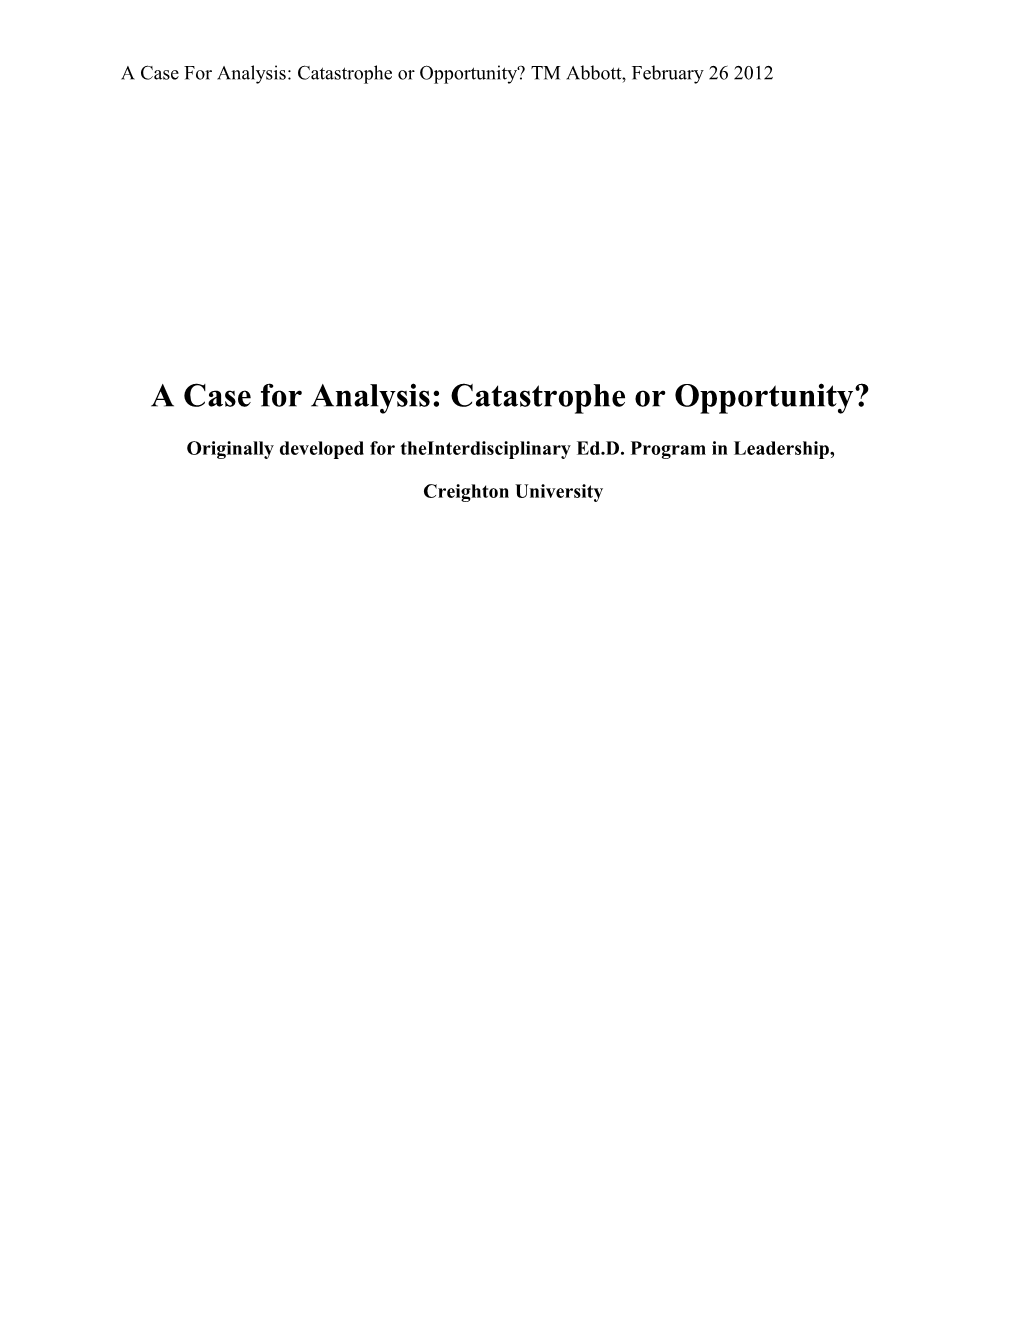 A Case for Analysis: Catastrophe Or Opportunity?